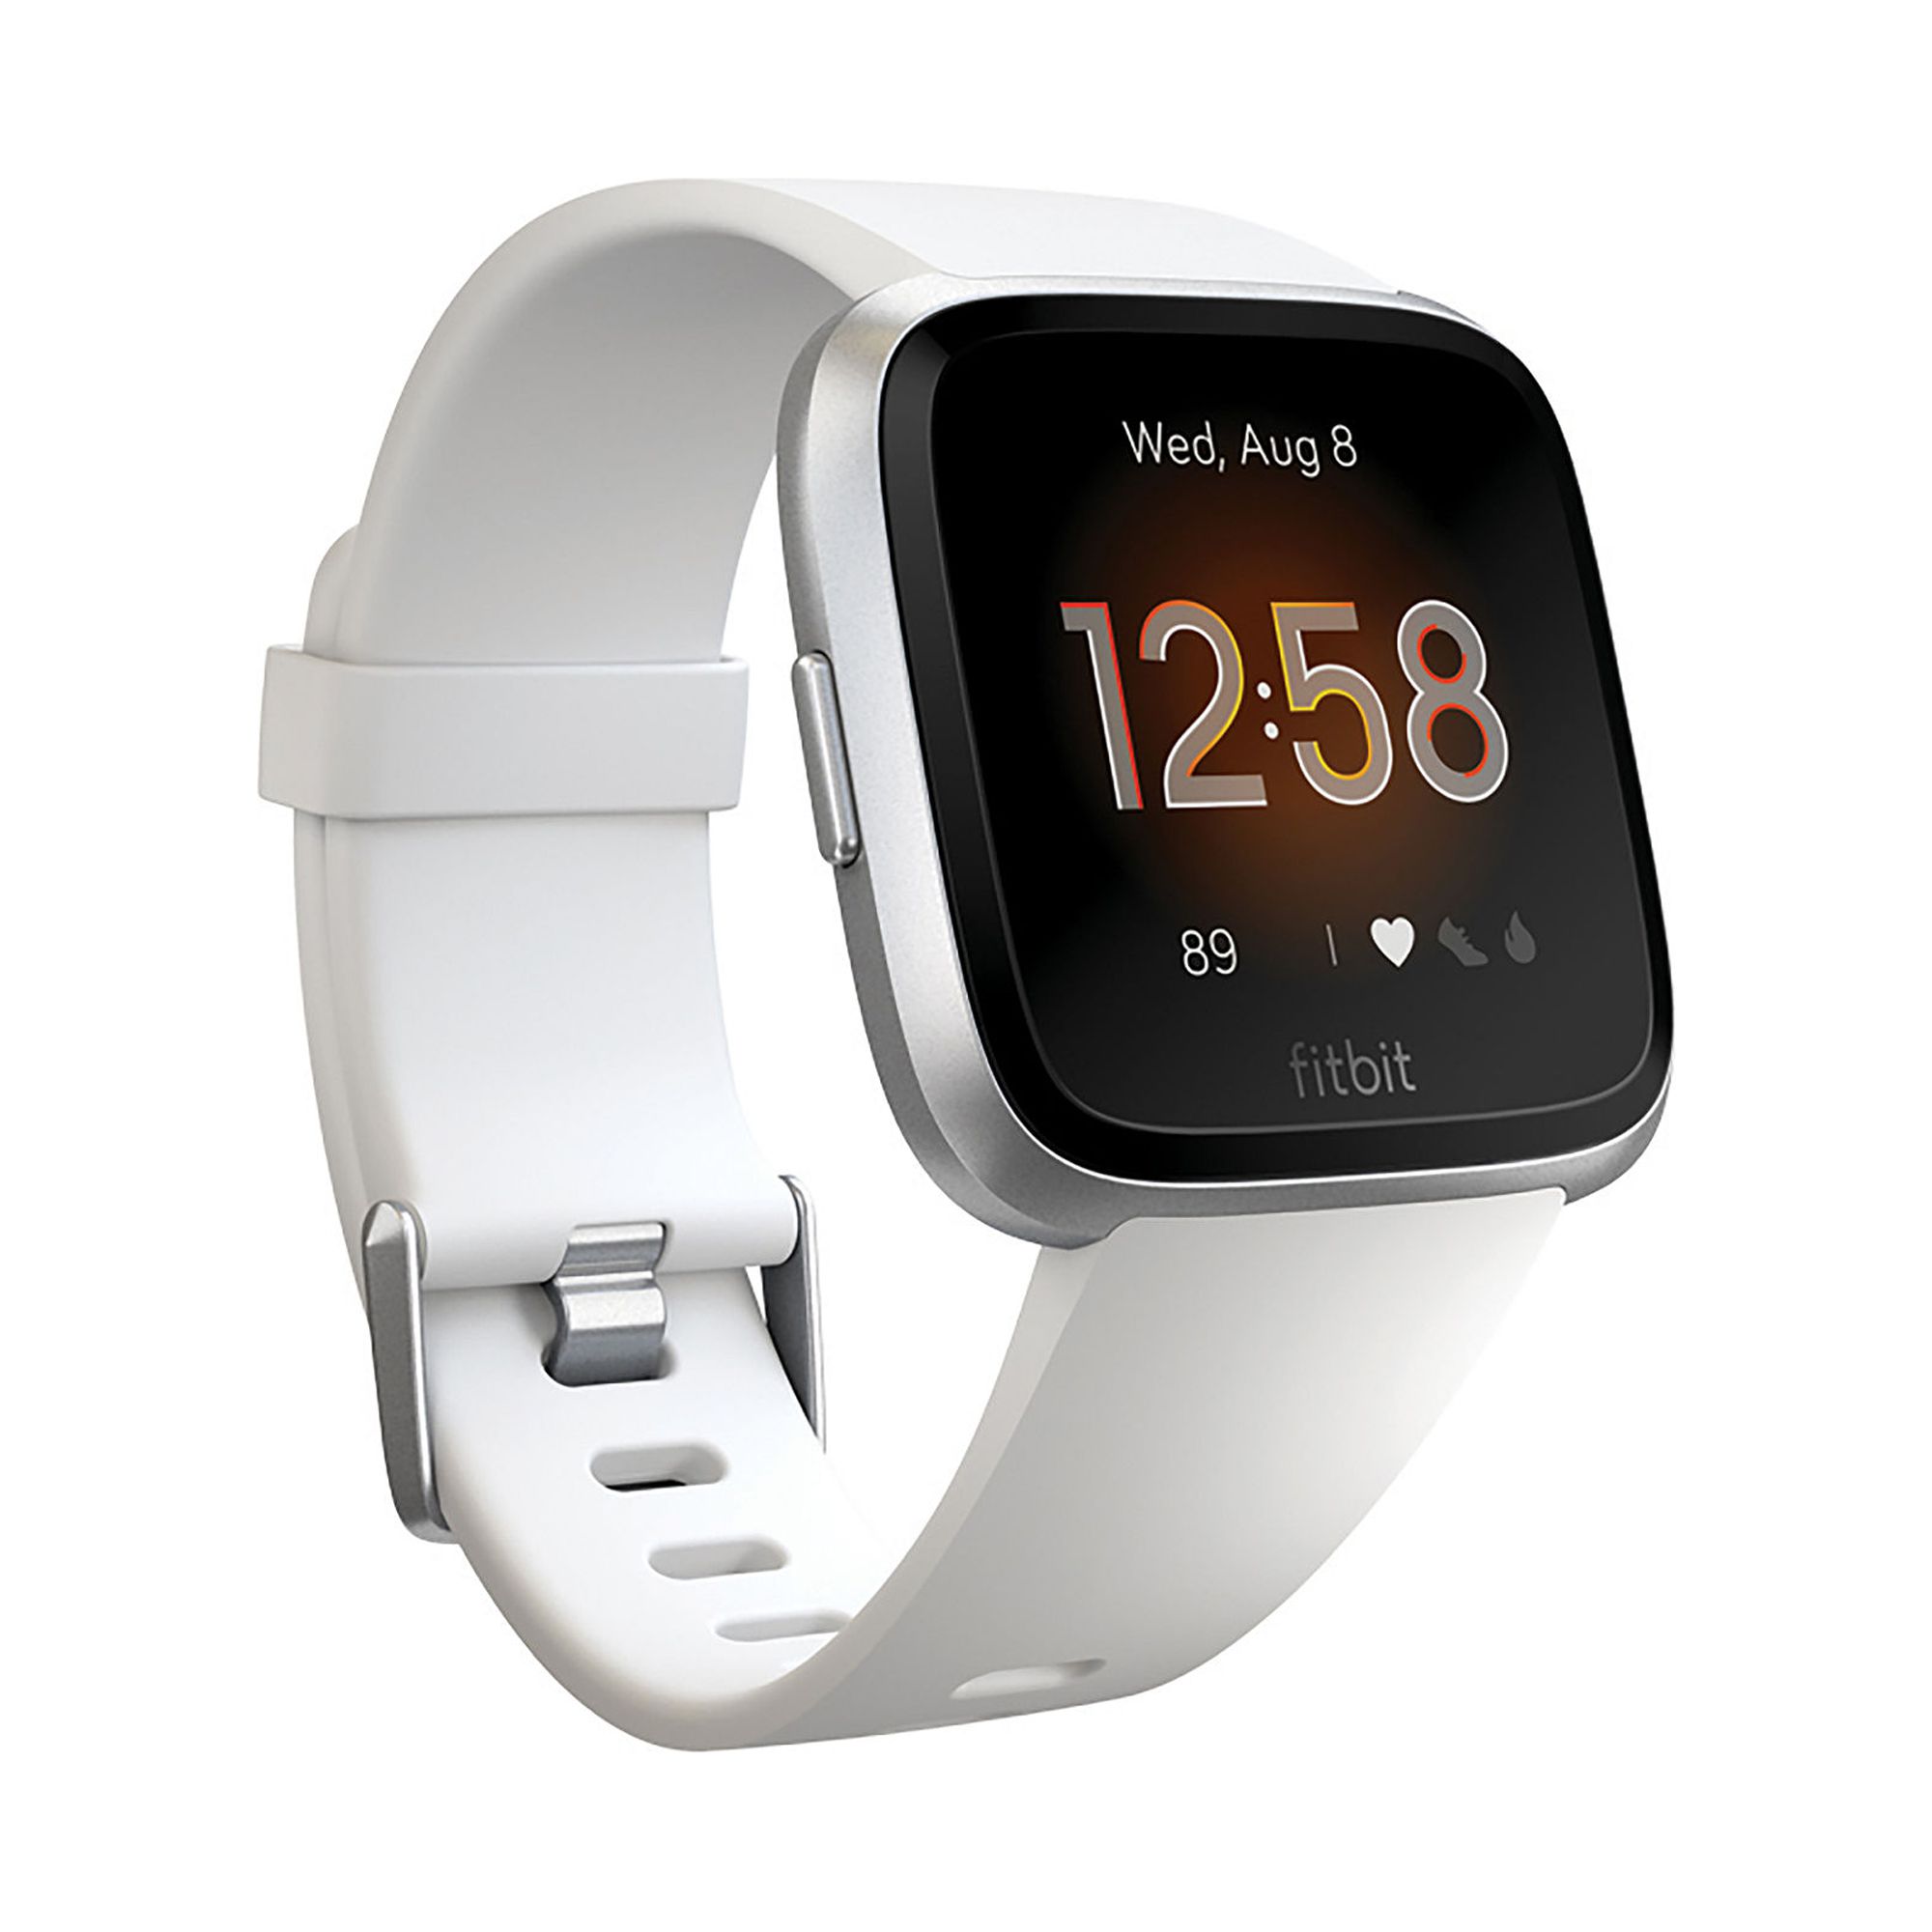 Restored Fitbit FB415SRWT Versa Smart Watch, One Size (S & L Bands Included) White/Silver Aluminum Lite Edition (Refurbished) - image 3 of 4